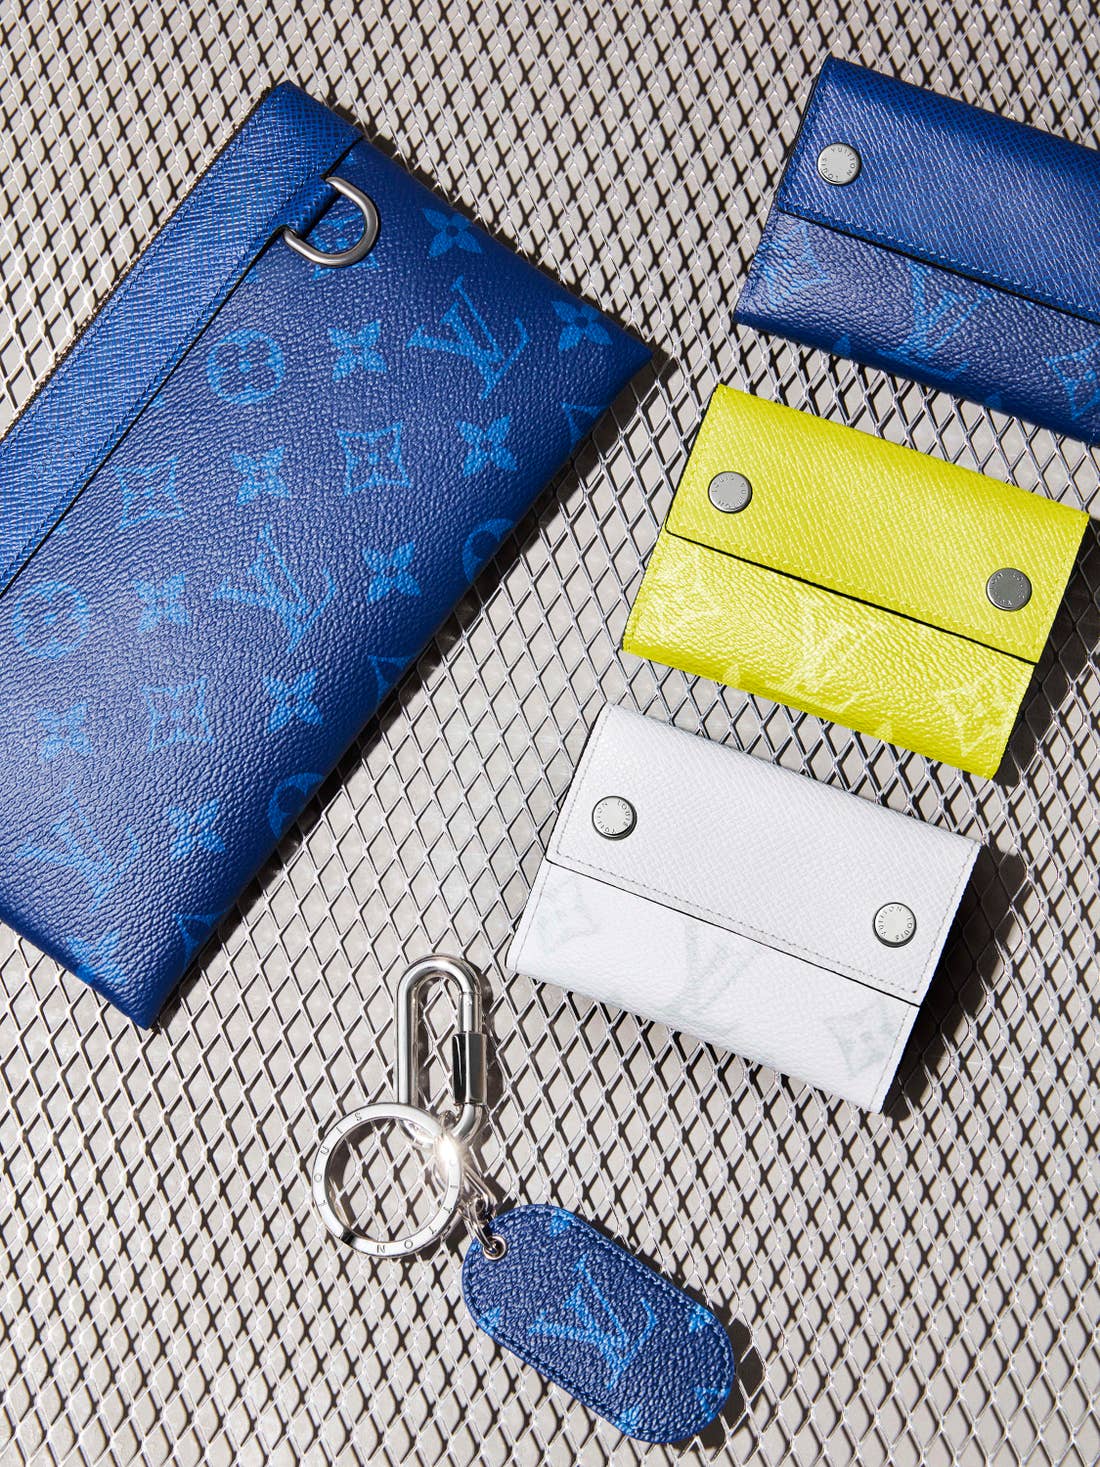 Louis Vuitton Launches A Prismatic Leather Goods Collection: Taigarama